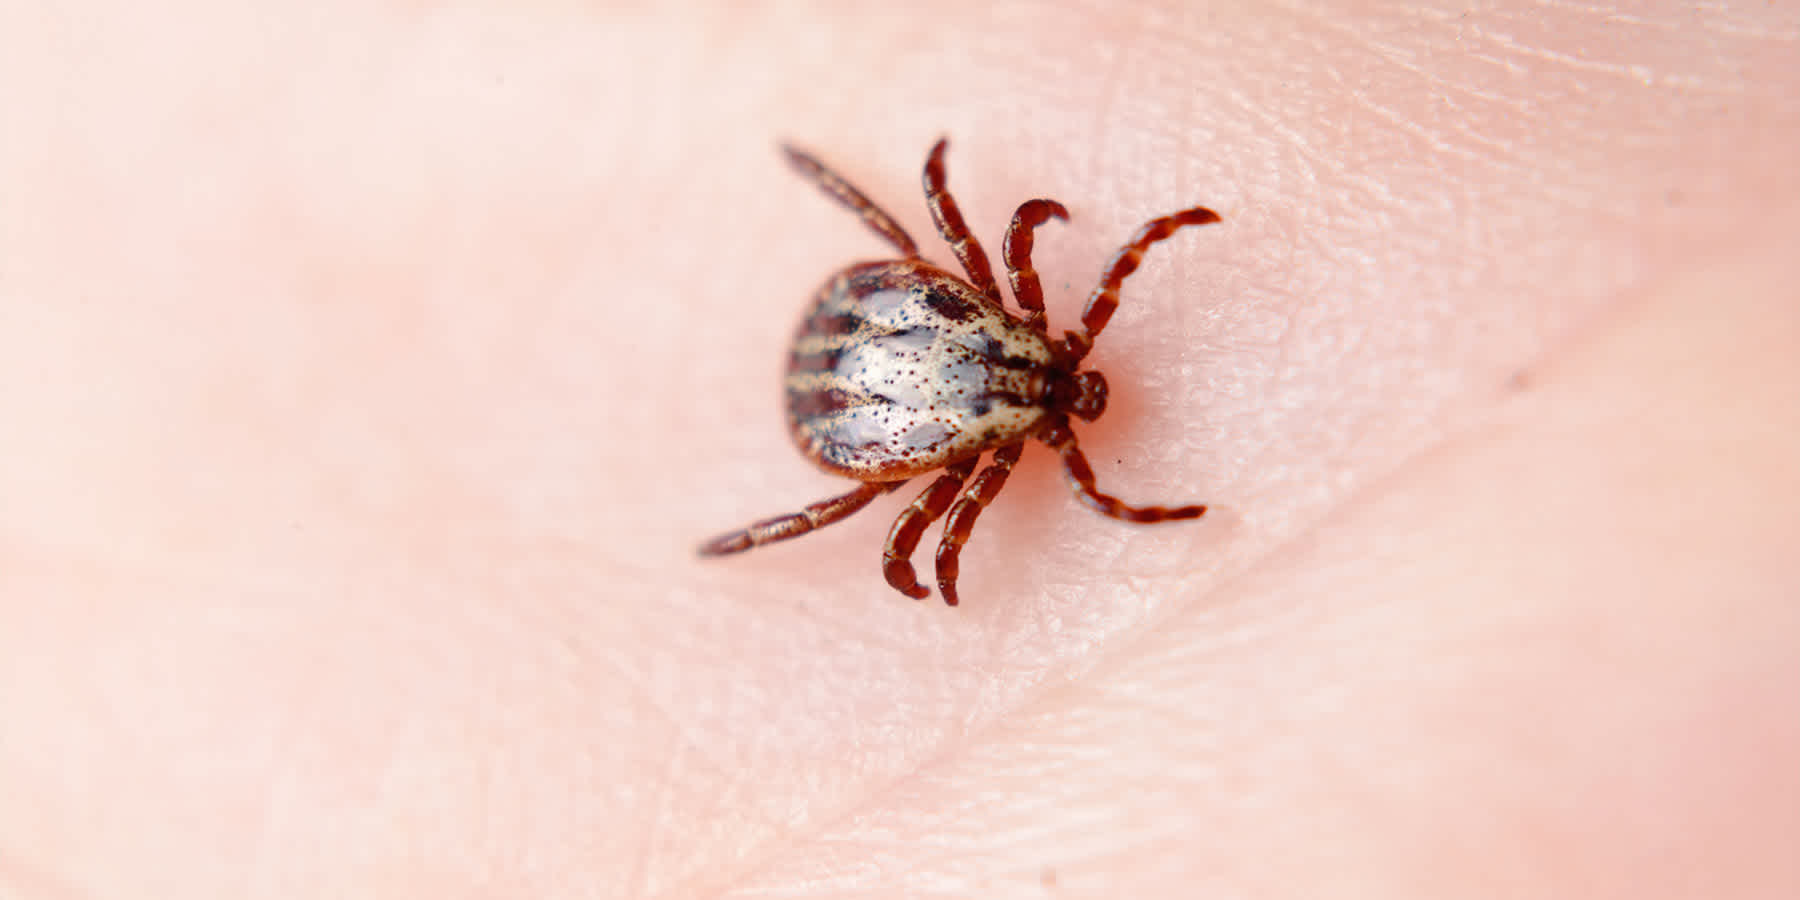 Tick with babesiosis crawling on person's skin